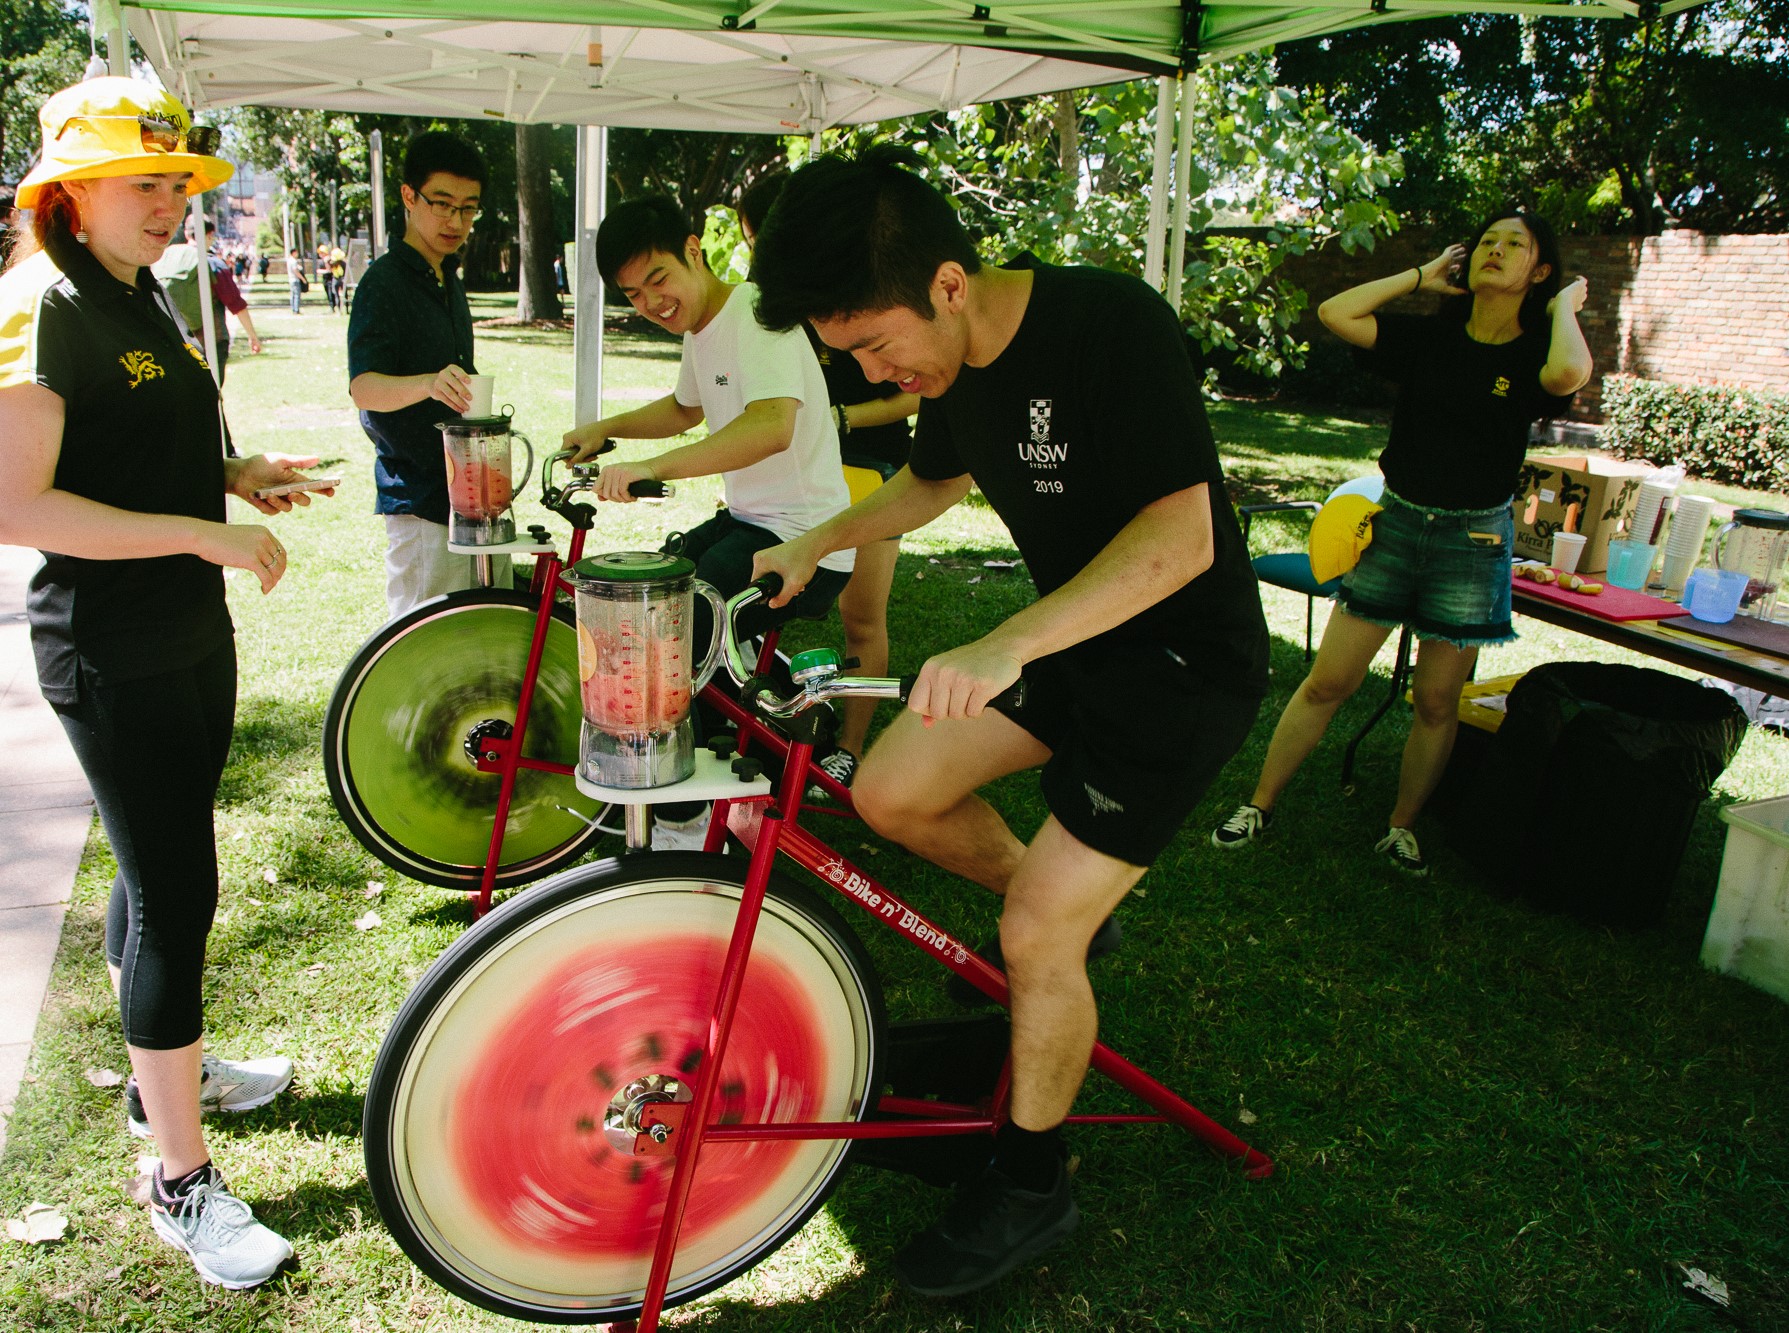 Smoothie bikes at Day of Play